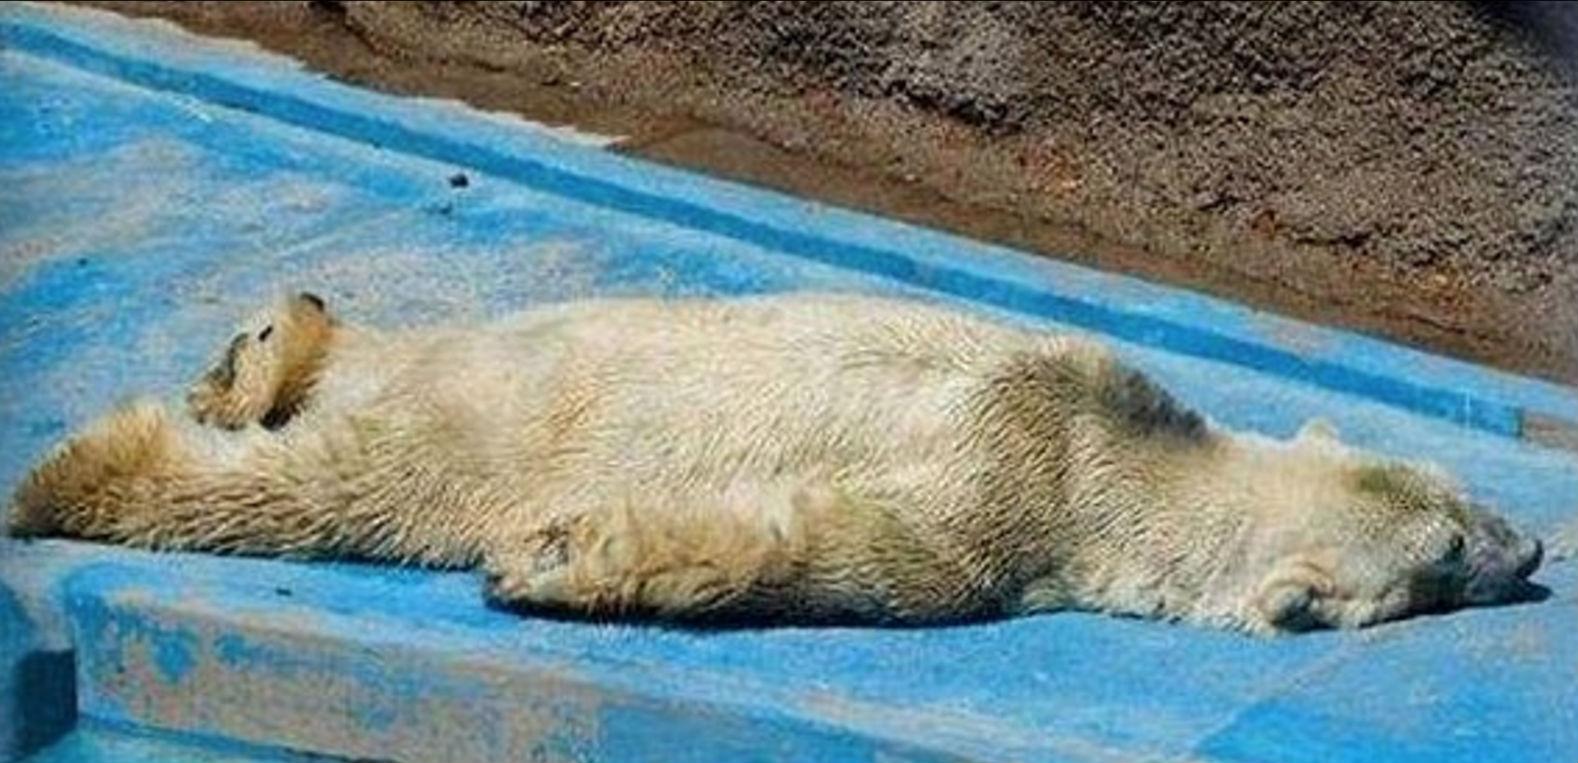 &#13;
Arturo stretches out in the heat&#13;